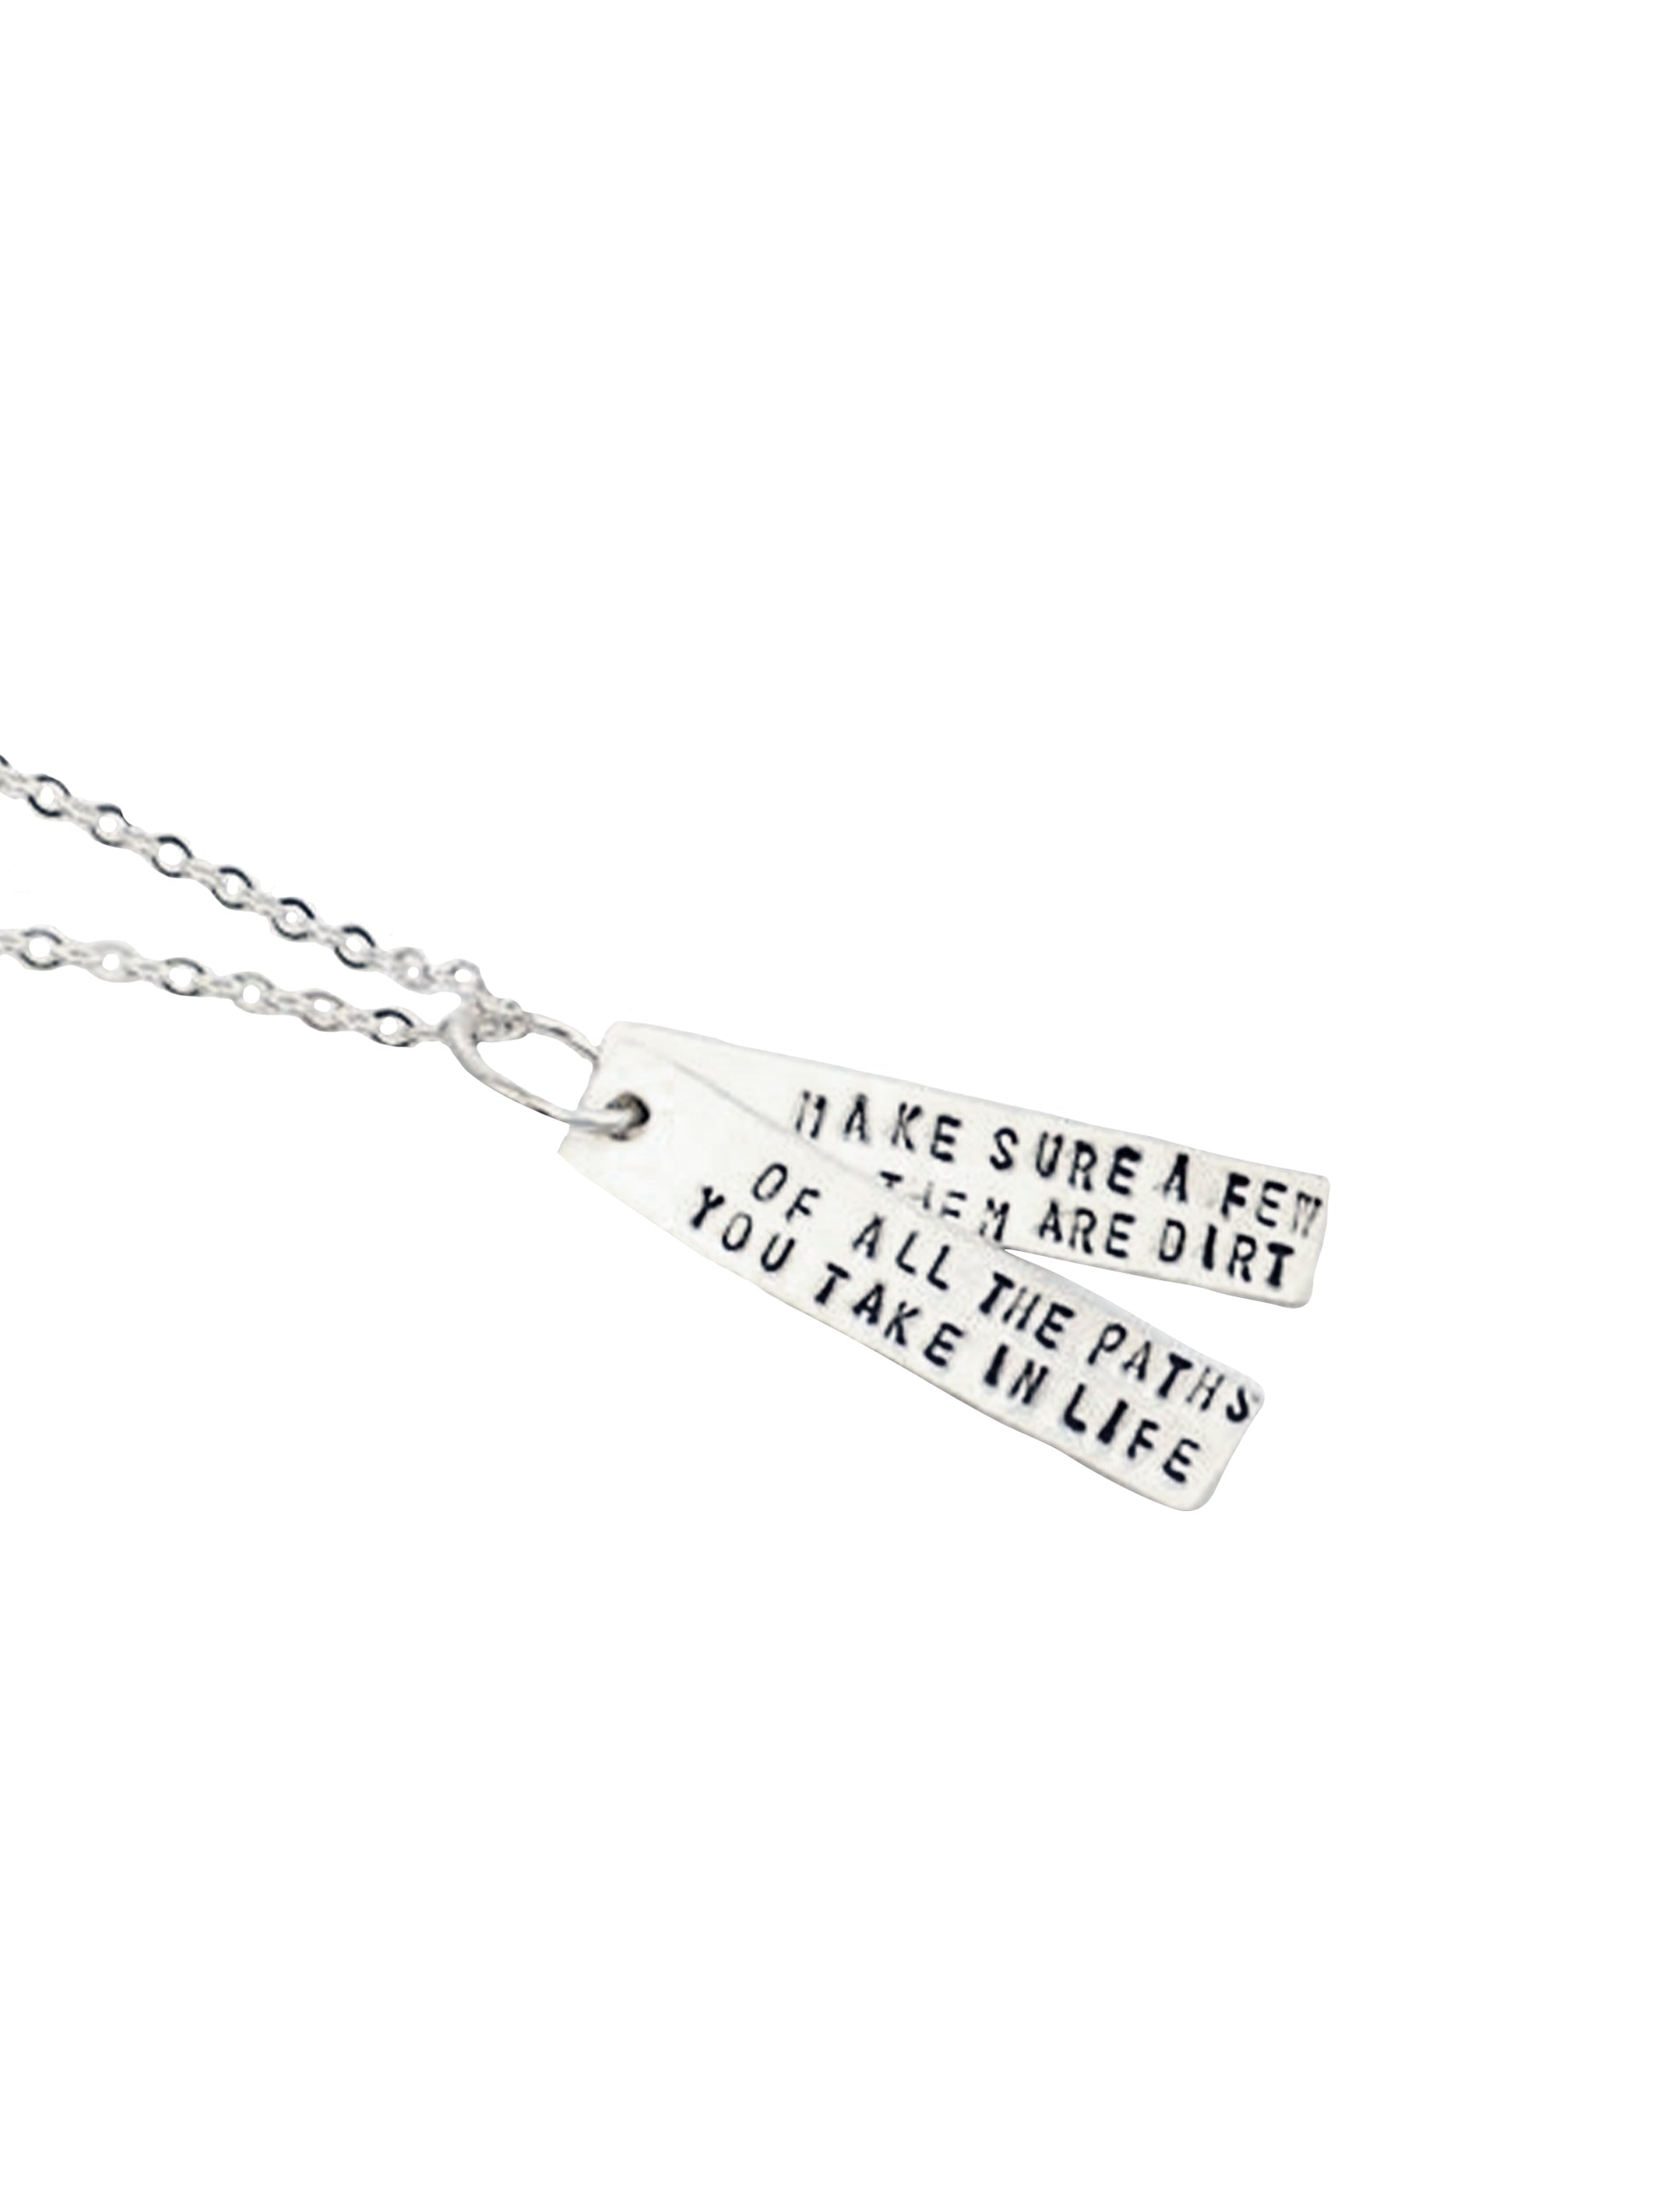 Chocolate & Steel Long-Bar Quote Necklace John Muir Of All The Paths You Take Silver Weston Table